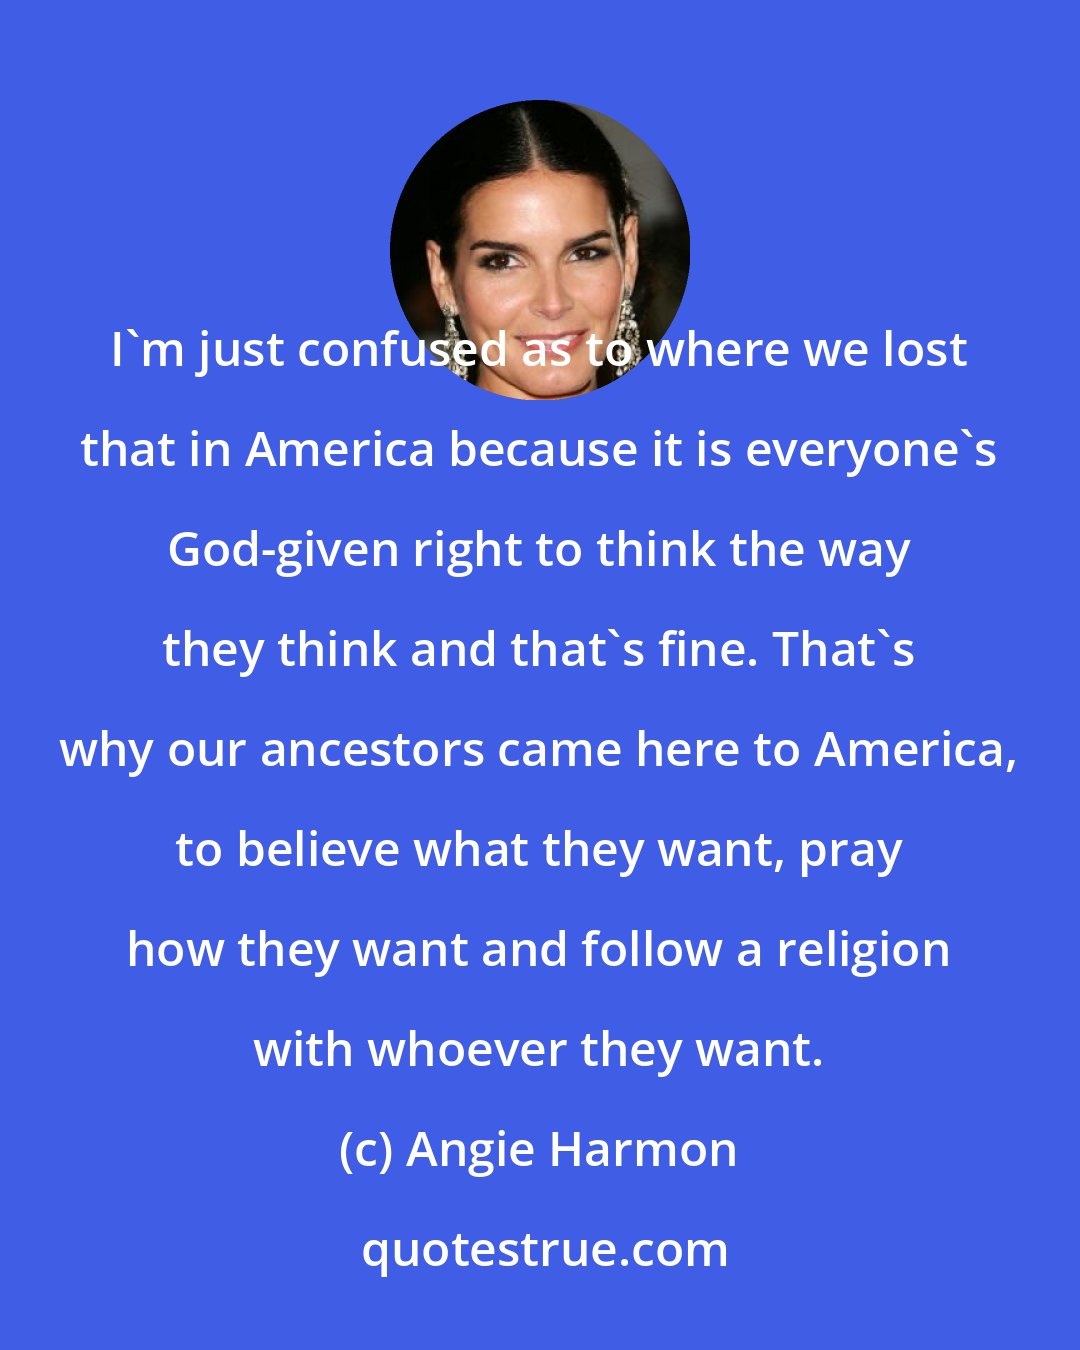 Angie Harmon: I'm just confused as to where we lost that in America because it is everyone's God-given right to think the way they think and that's fine. That's why our ancestors came here to America, to believe what they want, pray how they want and follow a religion with whoever they want.